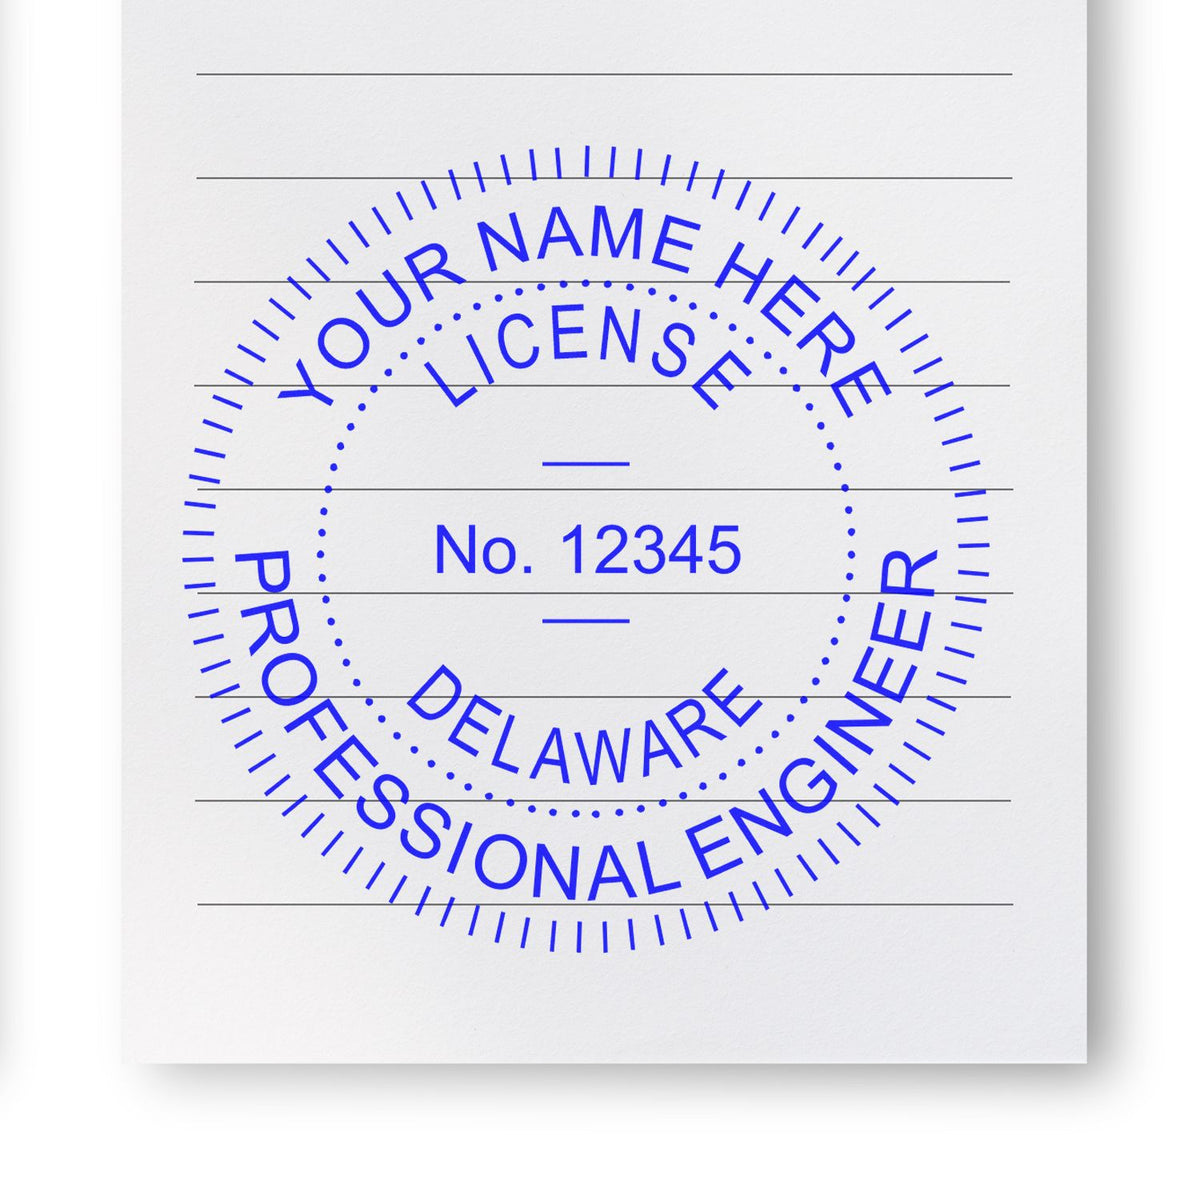 The Digital Delaware PE Stamp and Electronic Seal for Delaware Engineer stamp impression comes to life with a crisp, detailed photo on paper - showcasing true professional quality.